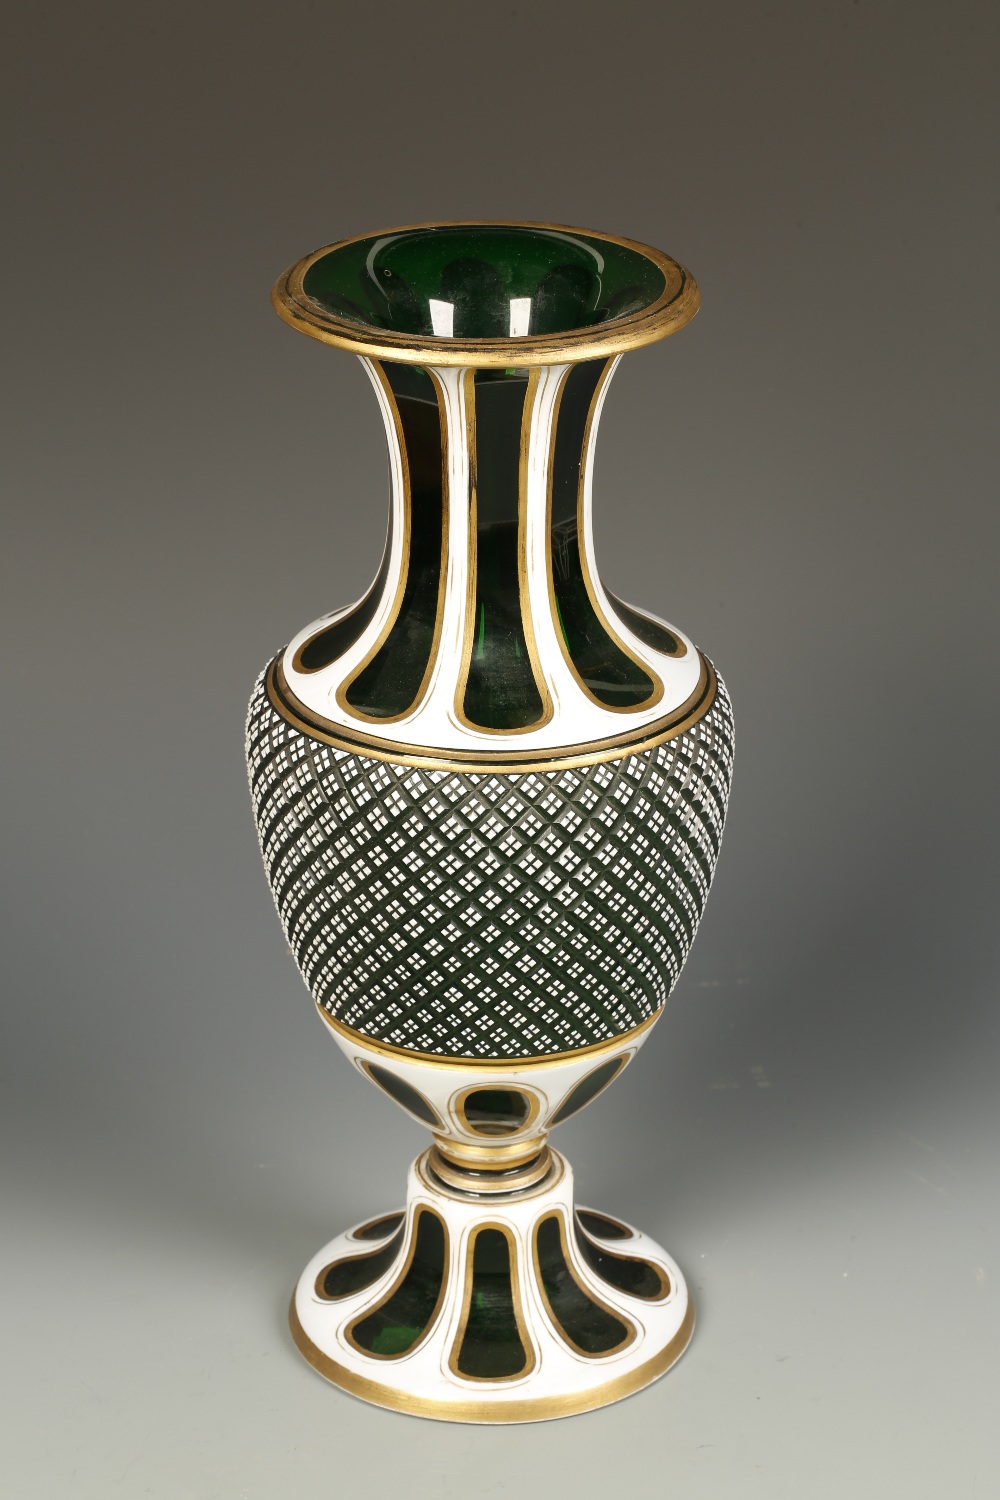 A BOHEMIAN GREEN AND WHITE OVERLAID VASE with gilt highlights, the baluster form vase with a narrow